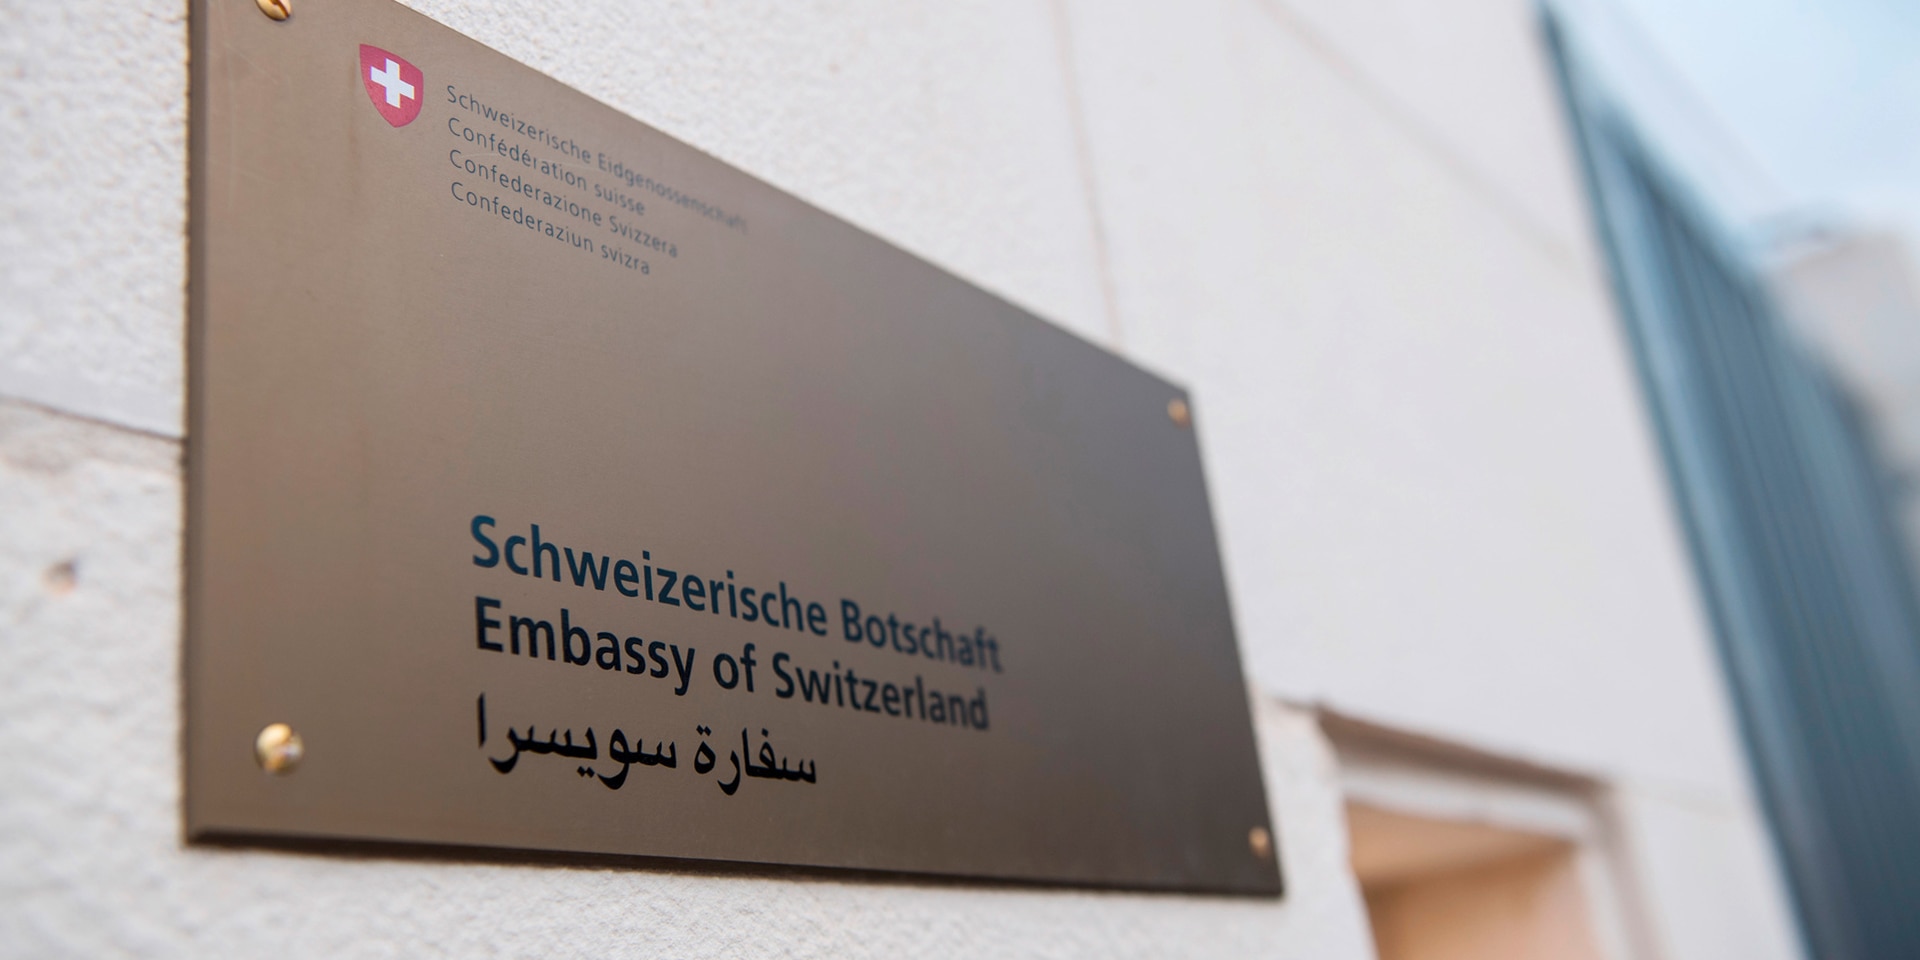 'Embassy of Switzerland' sign in German, English and Arabic.